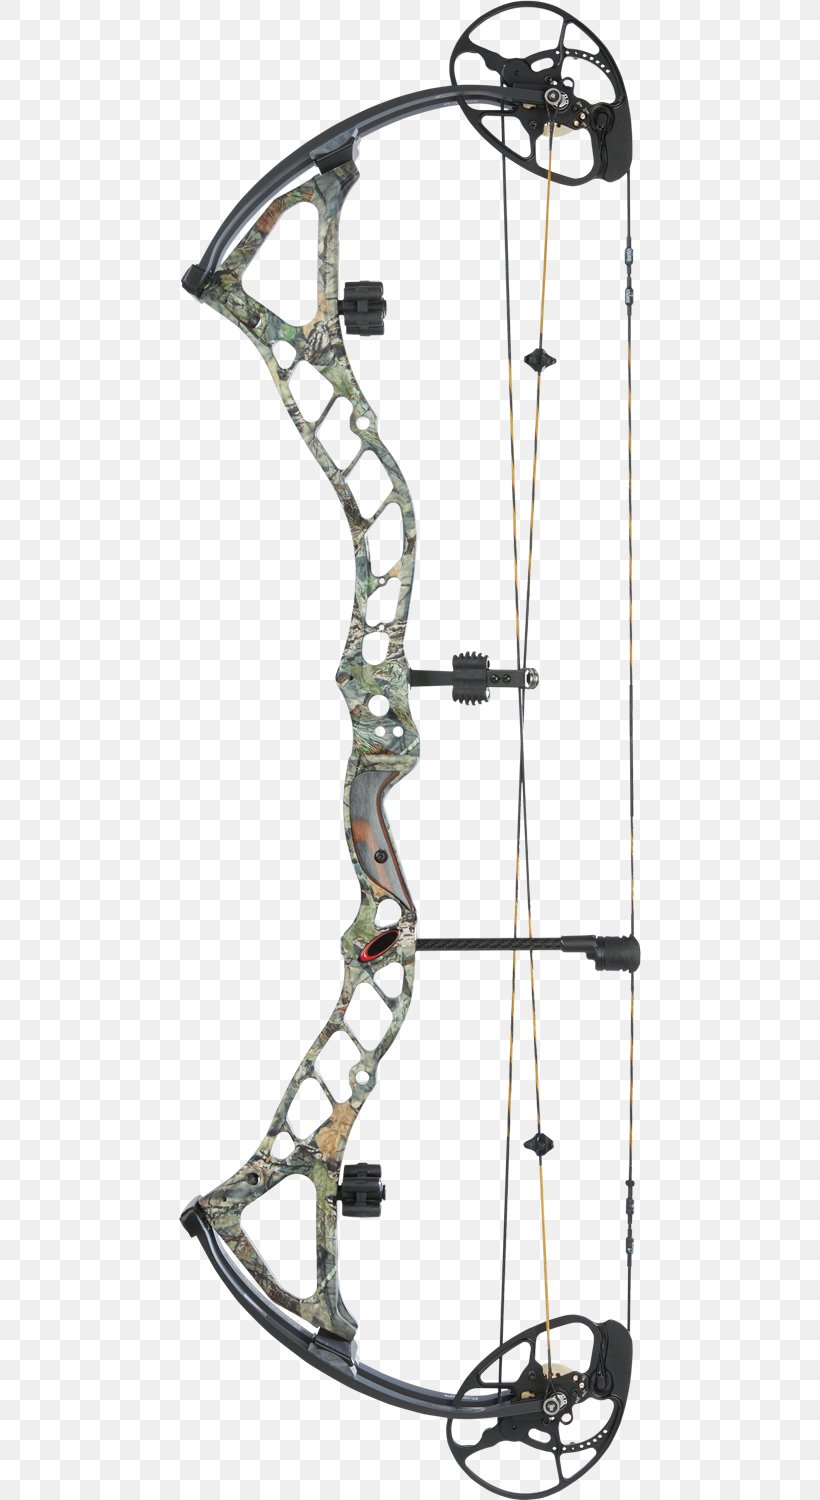 Compound Bows Binary Cam Archery Hunting Bow And Arrow, PNG, 462x1500px, Compound Bows, Aim Archery Limited, Archery, Archery Shop Ltd, Binary Cam Download Free